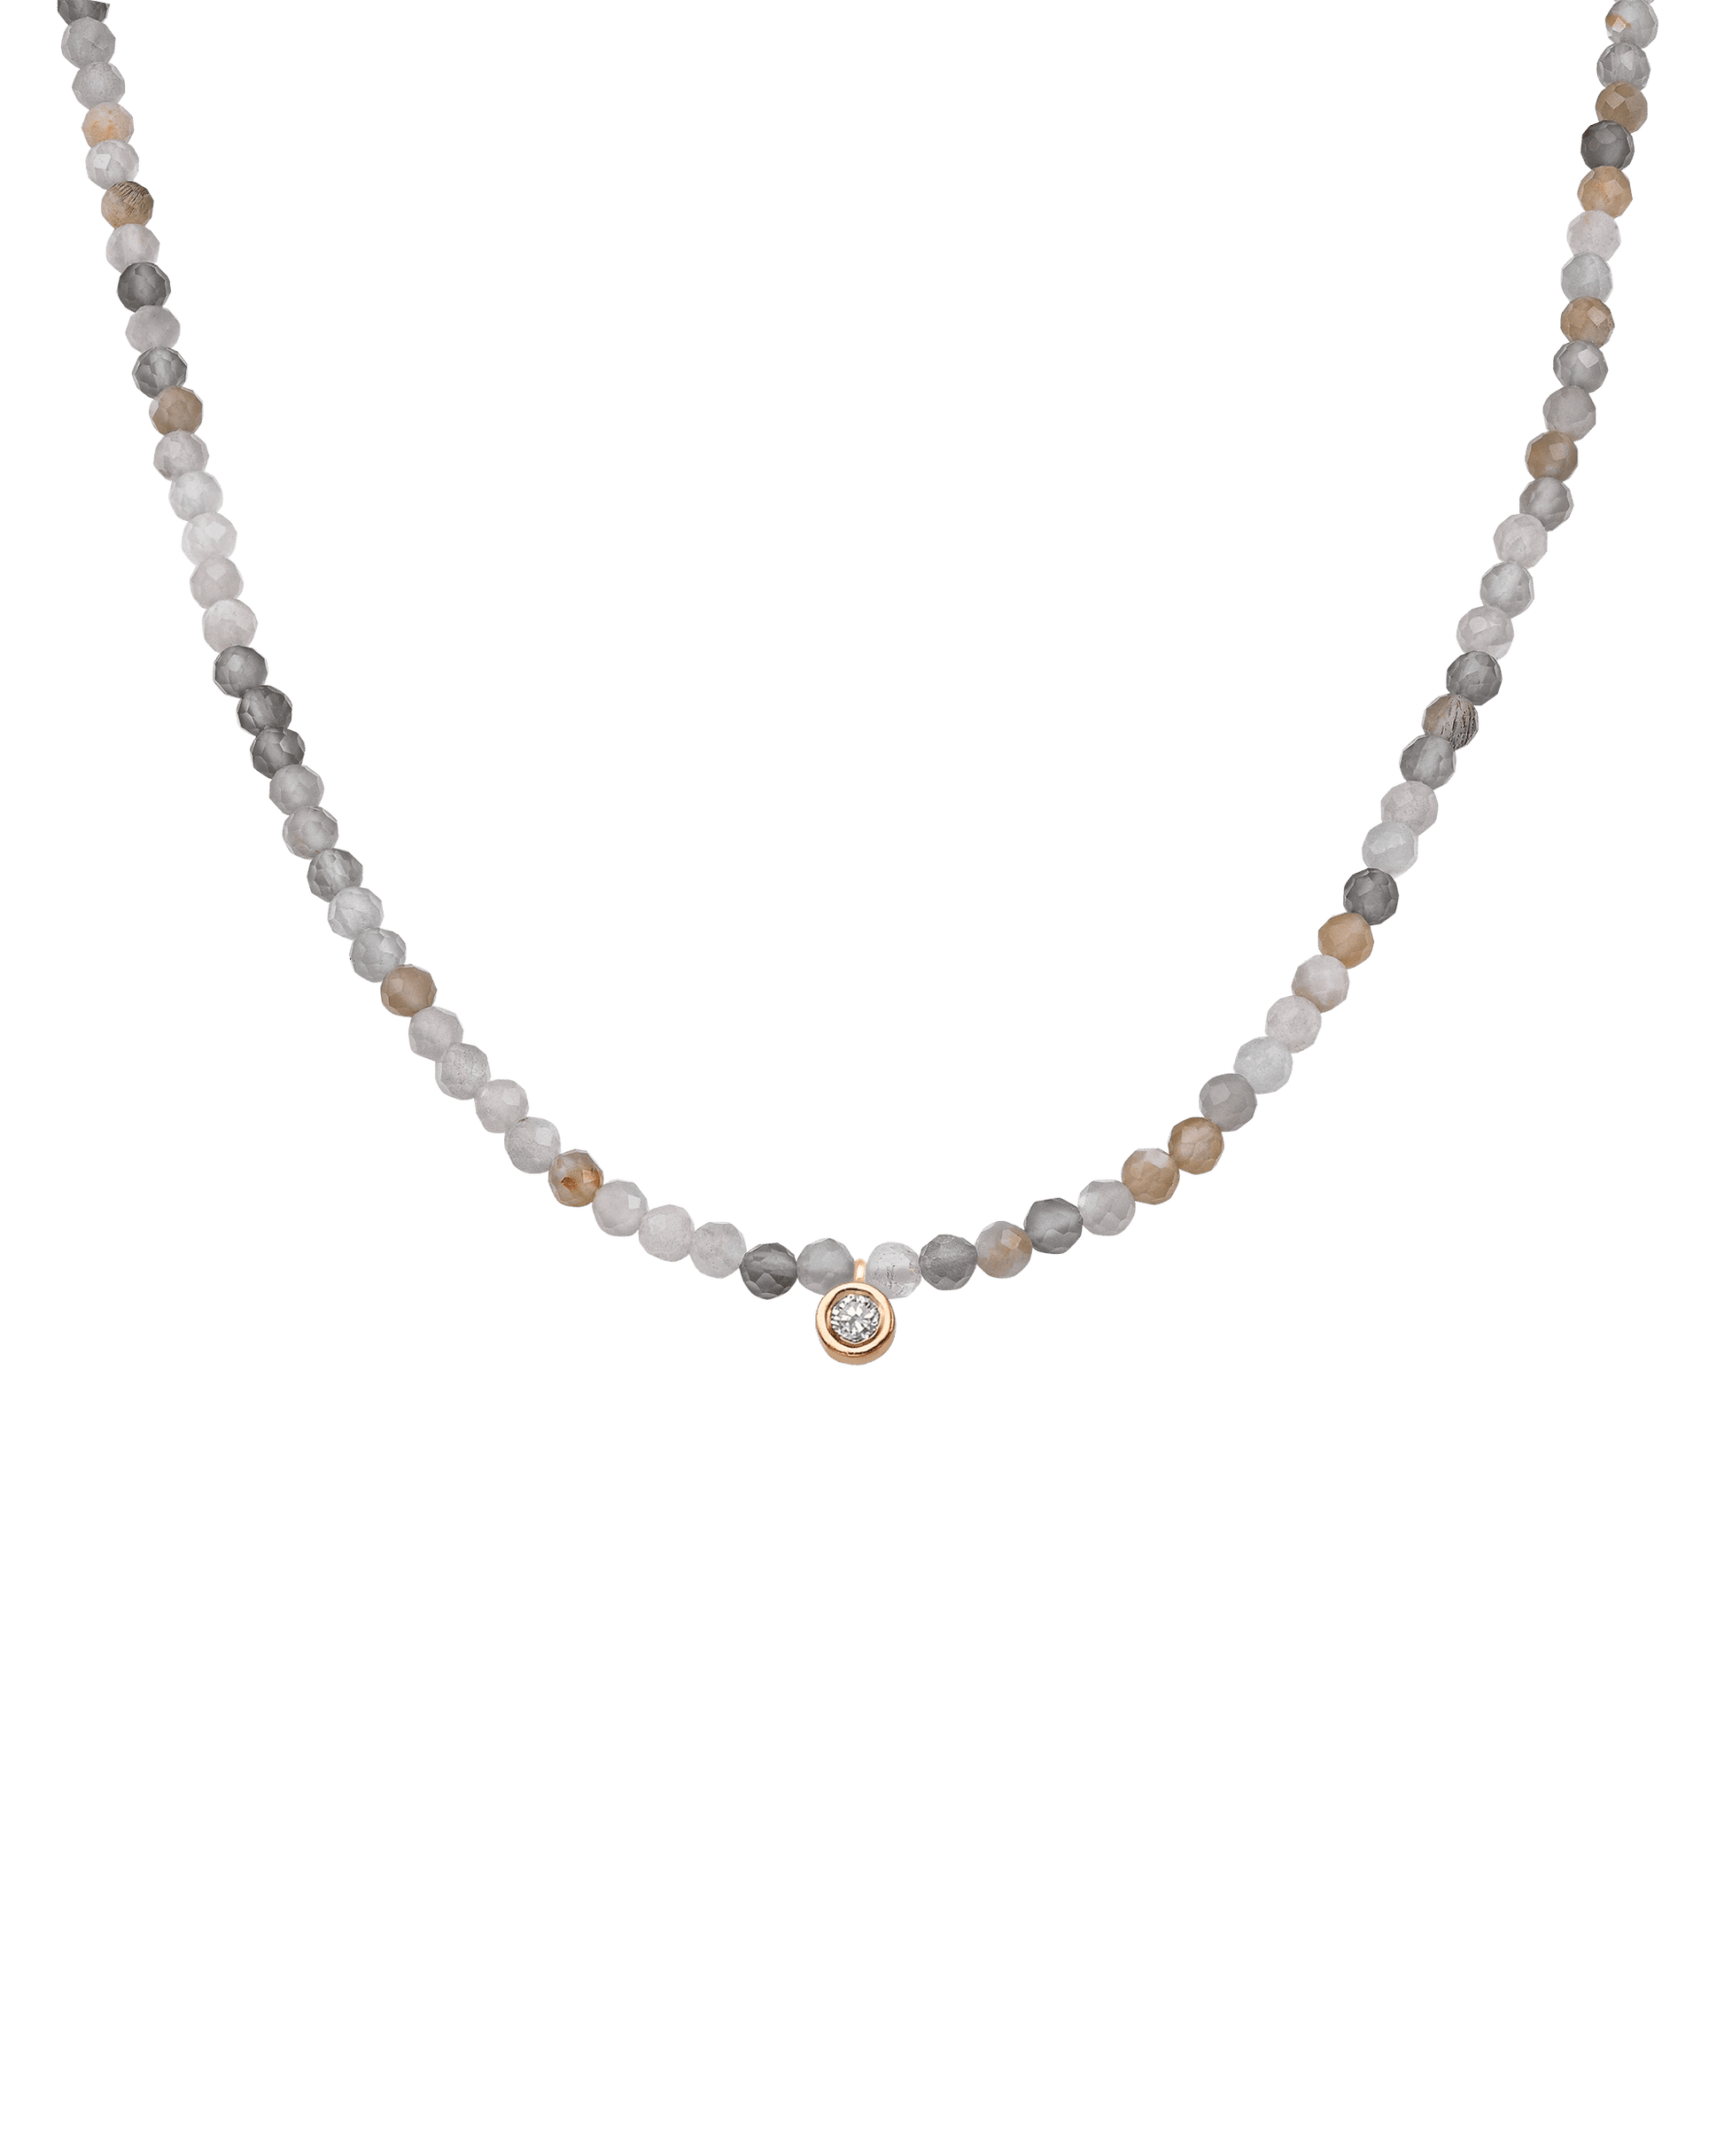 The Gemstone & Diamond Necklace - 14K Rose Gold Necklaces 14K Solid Gold Natural Moonstone Medium: 0.04ct 14"